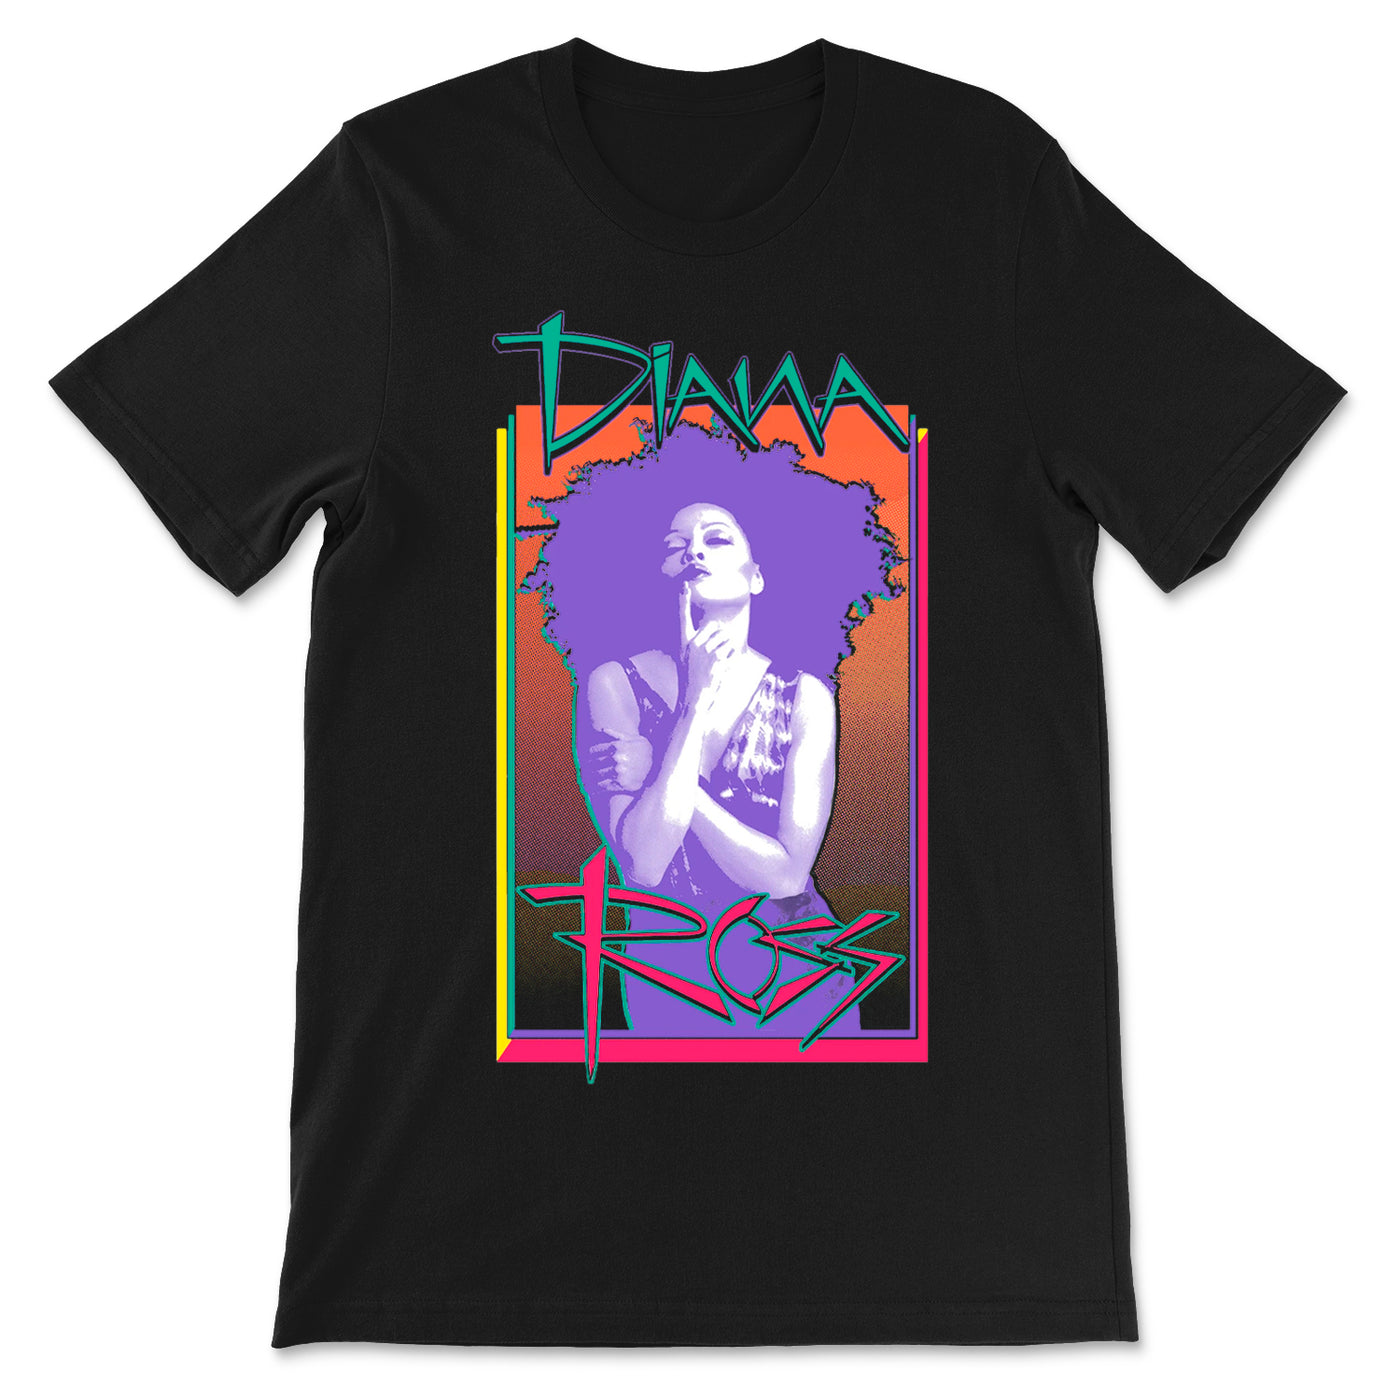 Diana Ross - Cover Page T-Shirt Black